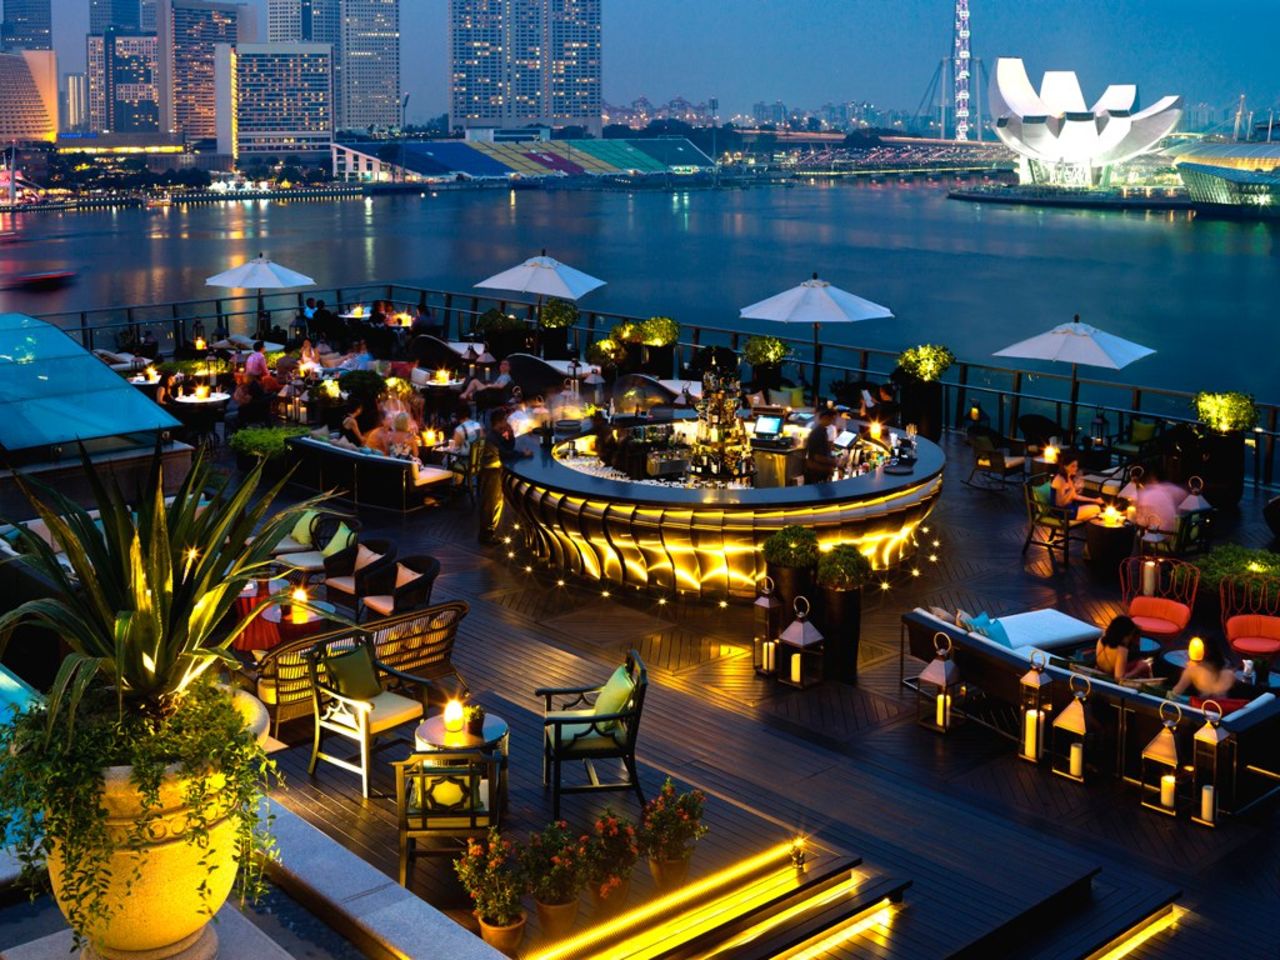 On the fifth floor of the Fullerton Bay Hotel, this<a href="http://www.fullertonbayhotel.com/dining/lantern" target="_blank" target="_blank"> </a>open-air bar features panoramic views over the Marina Bay waterfront and Singapore skyline.